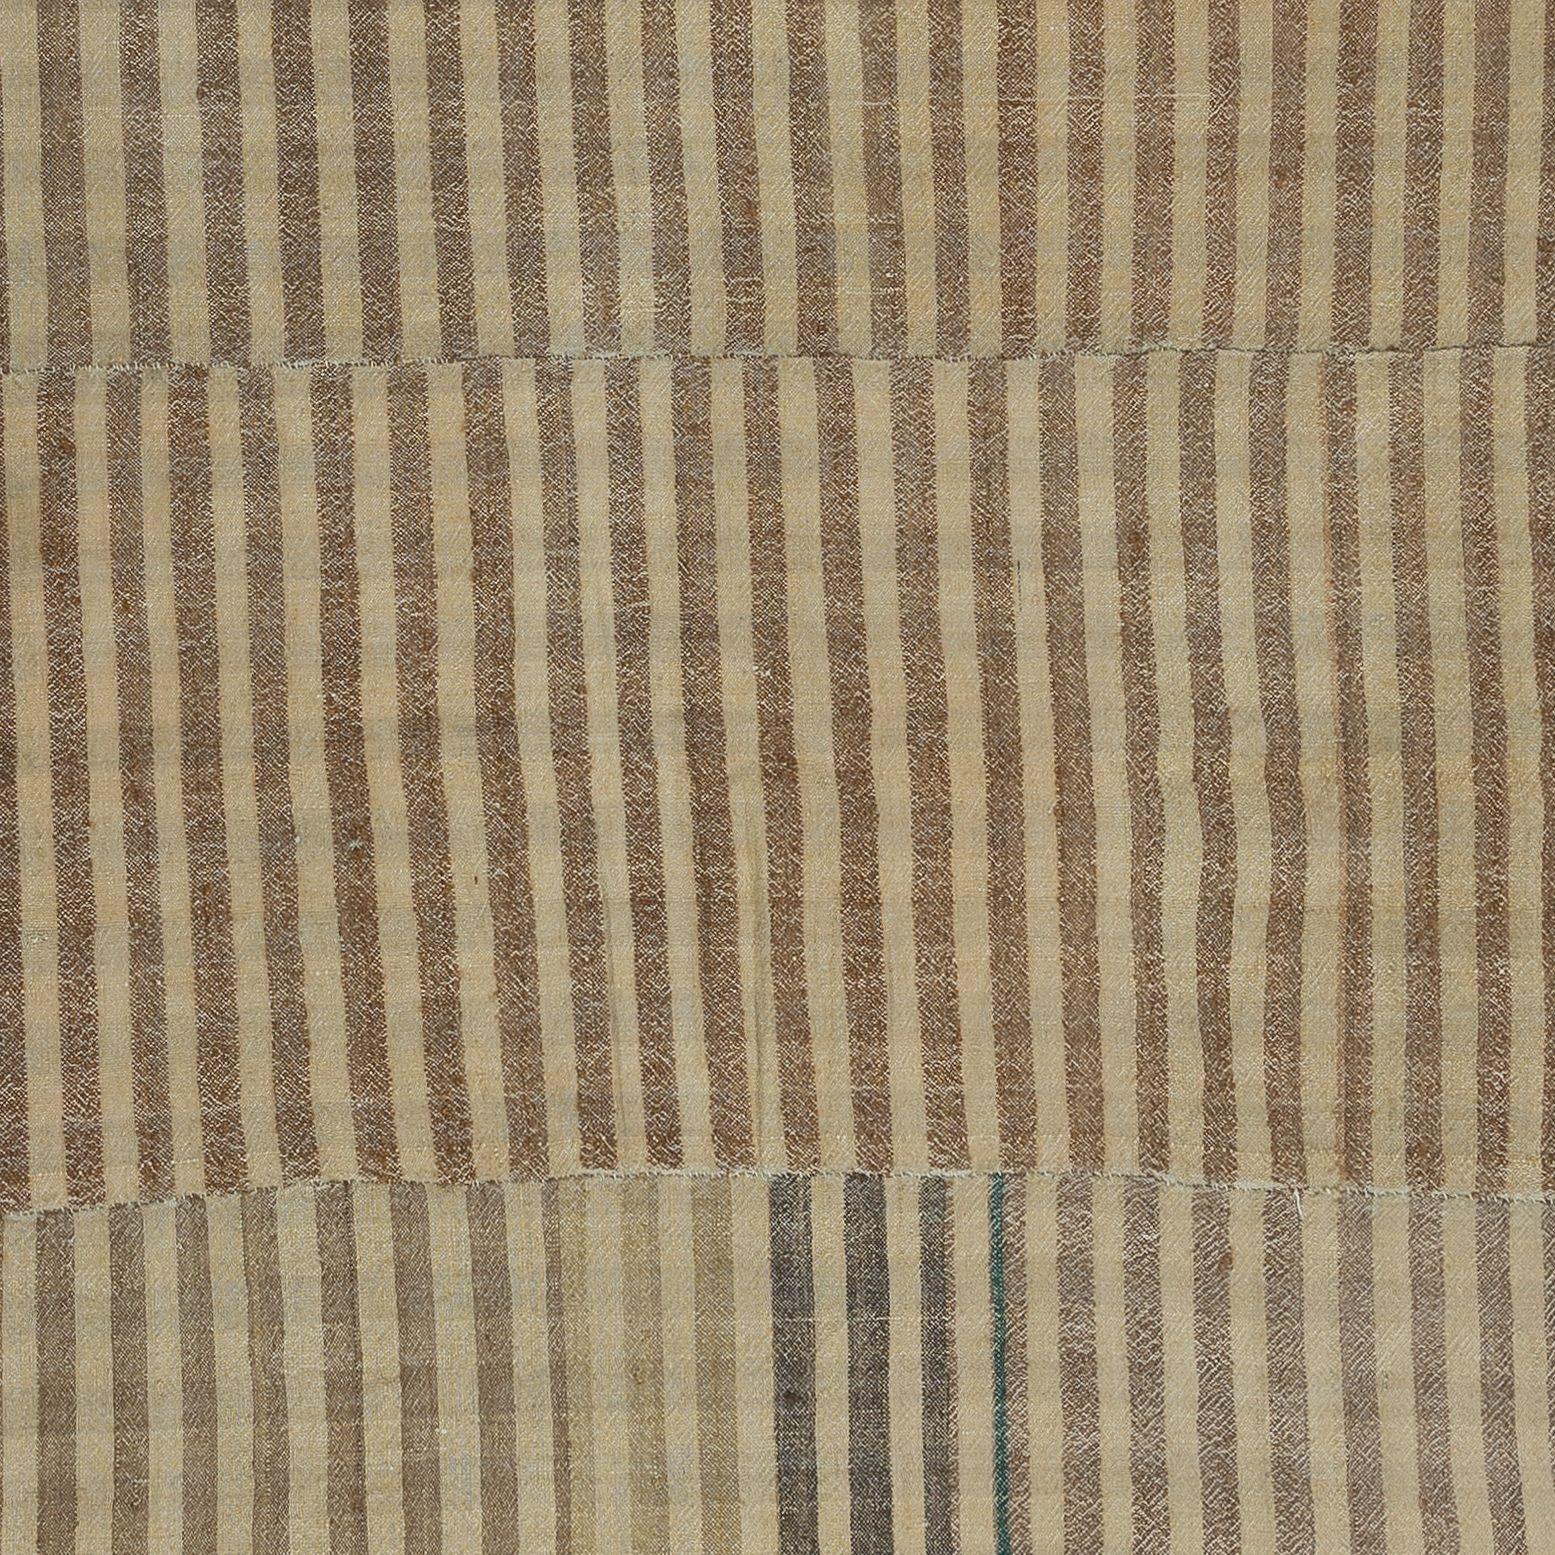 4.2x4.6 Ft Flat-Weave Vintage Anatolian Kilim, Hand-Woven Striped Rug, 100% Wool In Good Condition For Sale In Philadelphia, PA